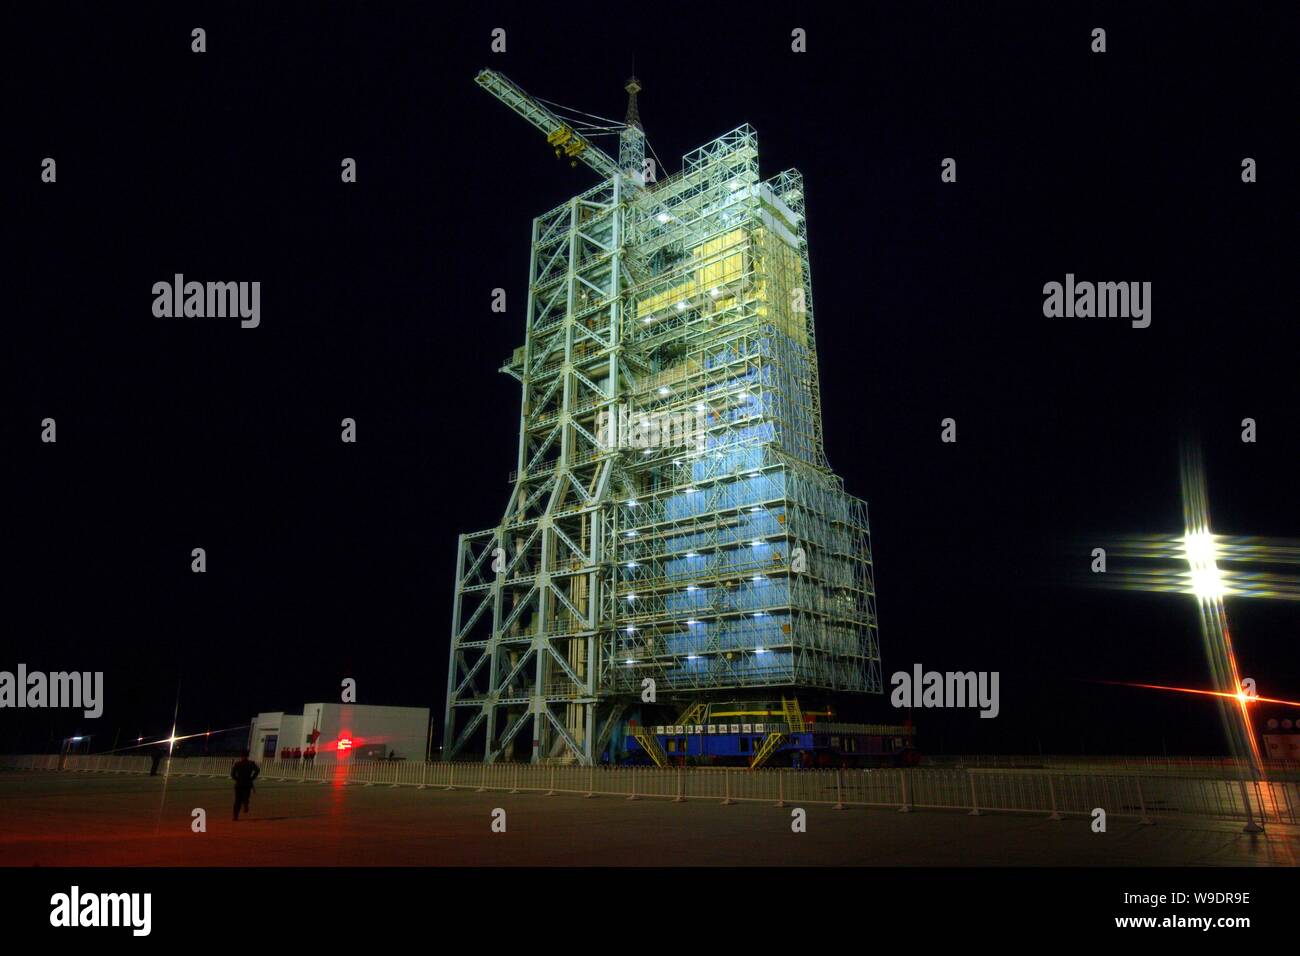 Night view of a Long March 2F (CZ-2F) space rocket carrying the Shenzhou VII manned spacecraft on the launch pad at Jiuquan Satellite Launch Center in Stock Photo